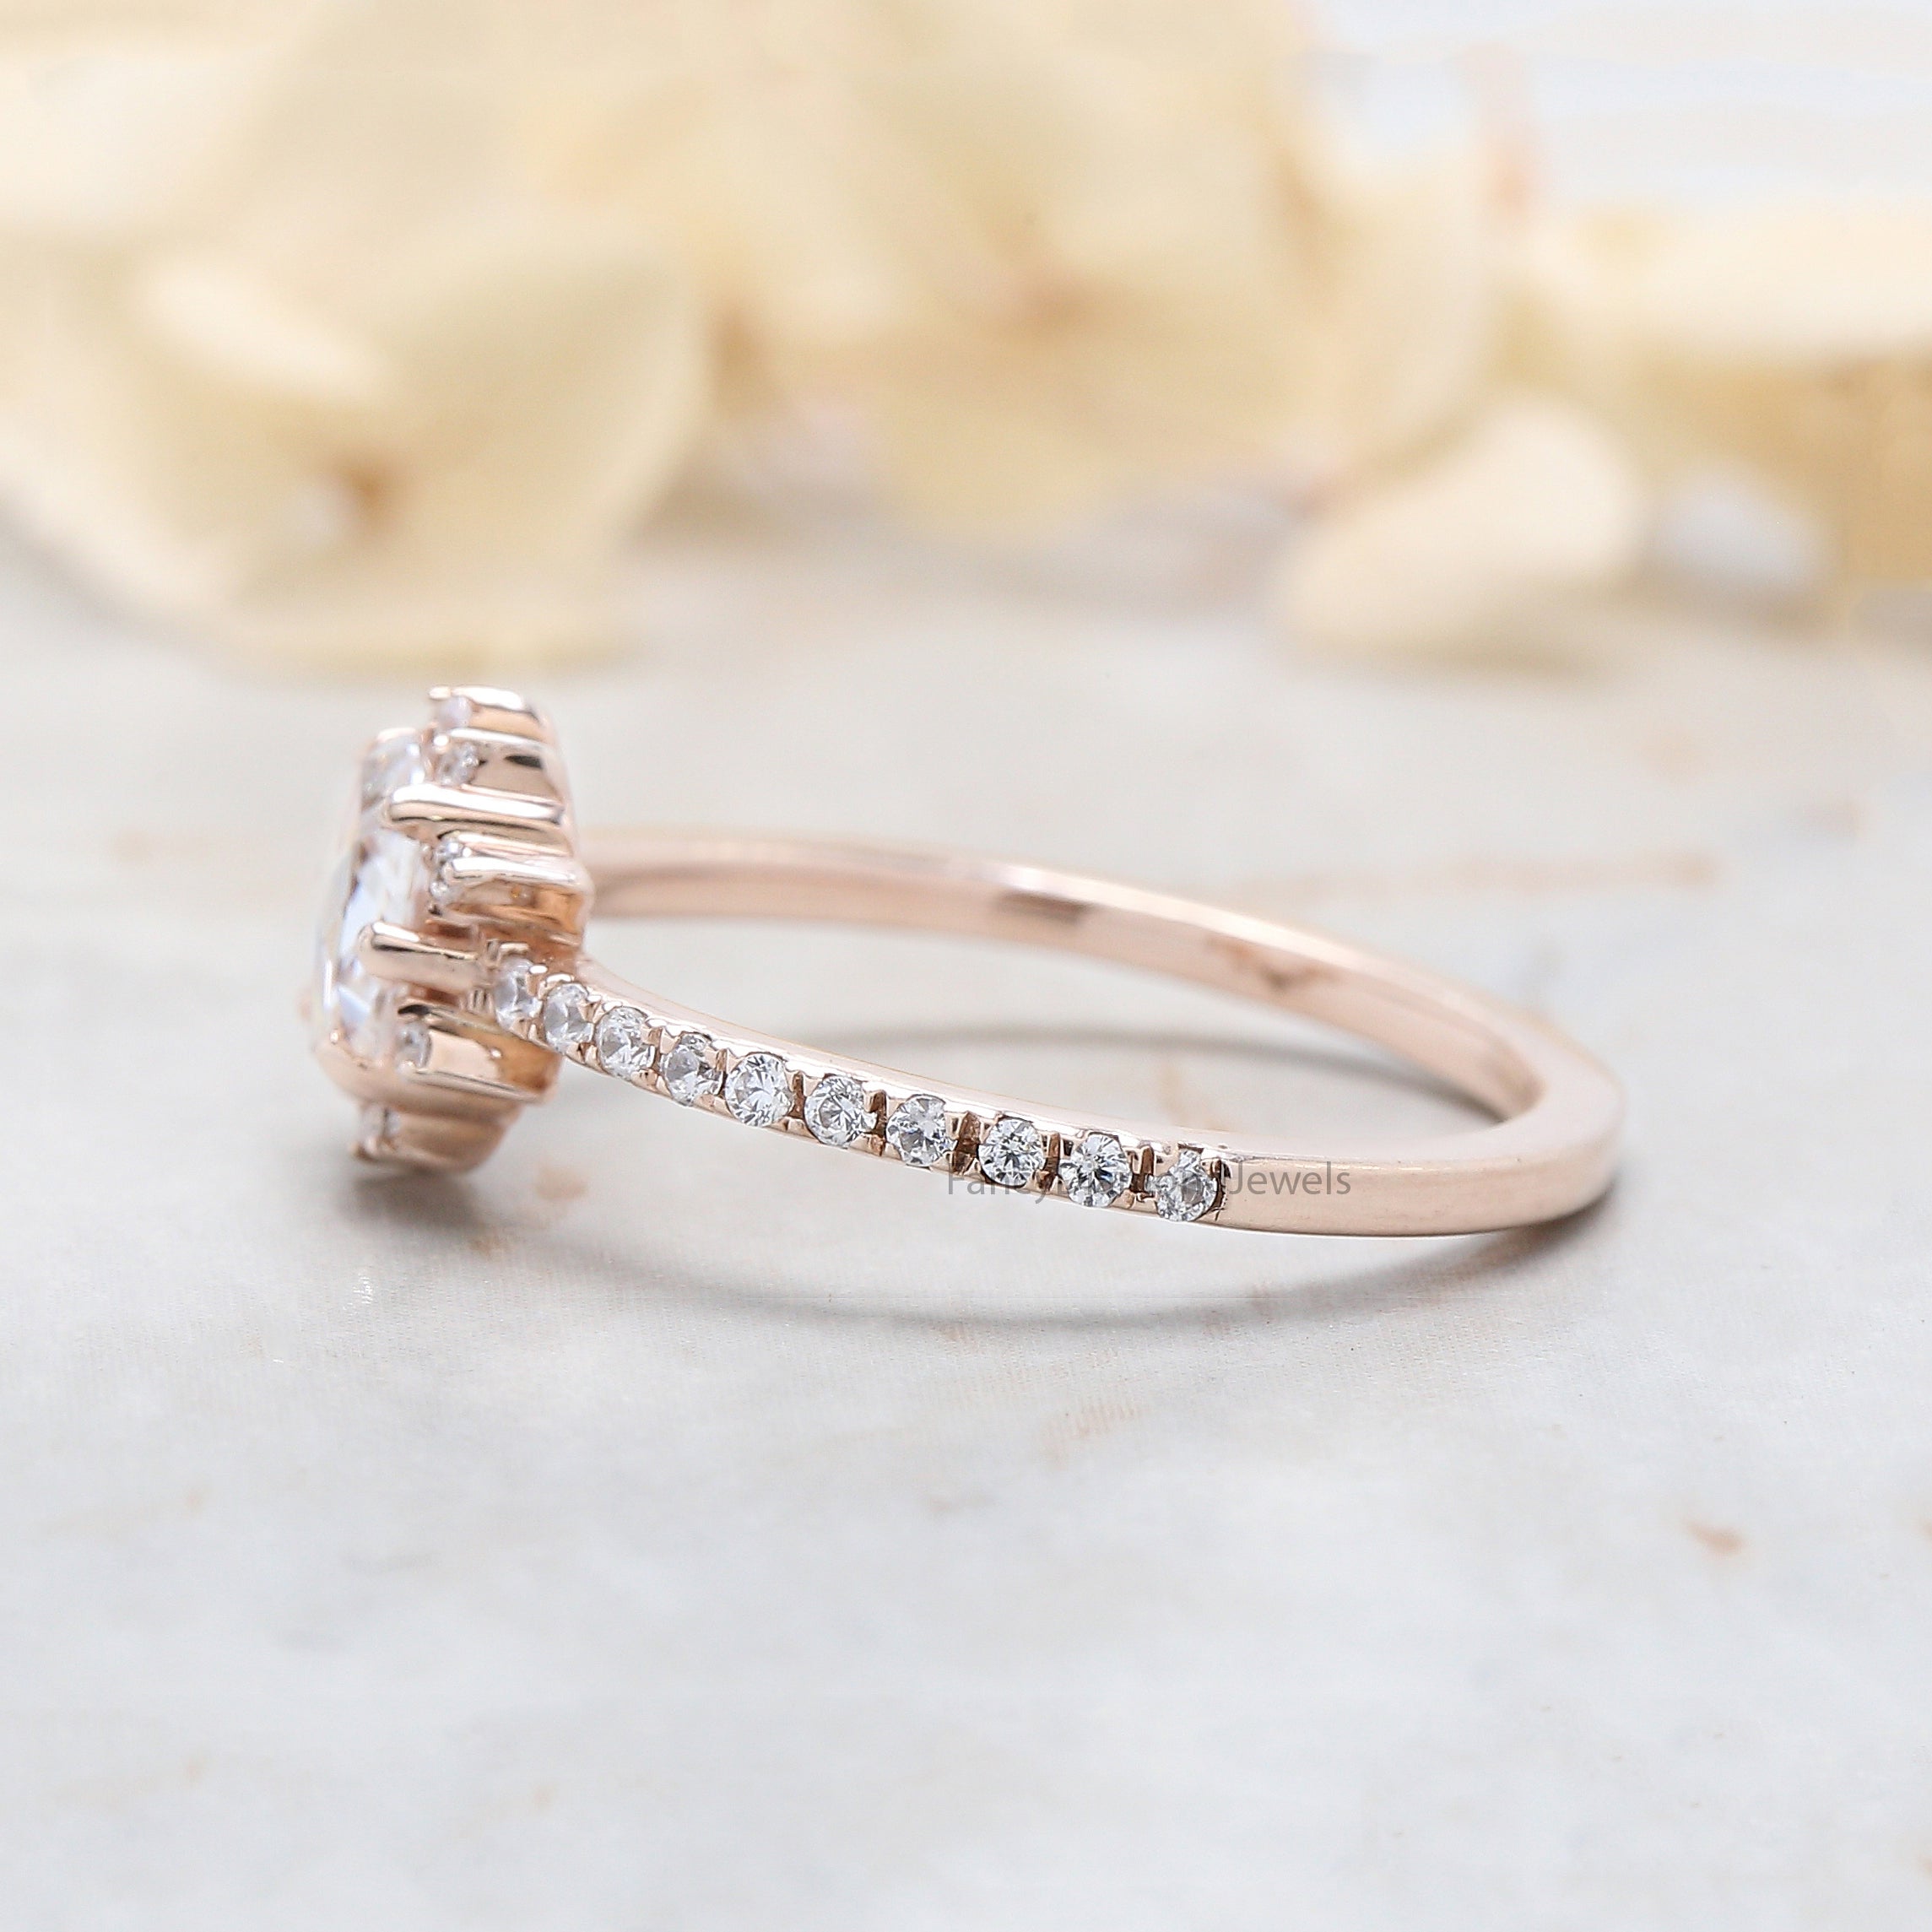 Round Rose Cut White Color Diamond Ring 0.55 Ct 6.00 MM Round Shape Diamond Ring 14K Rose Gold Silver Engagement Ring Gift For Her QL6242